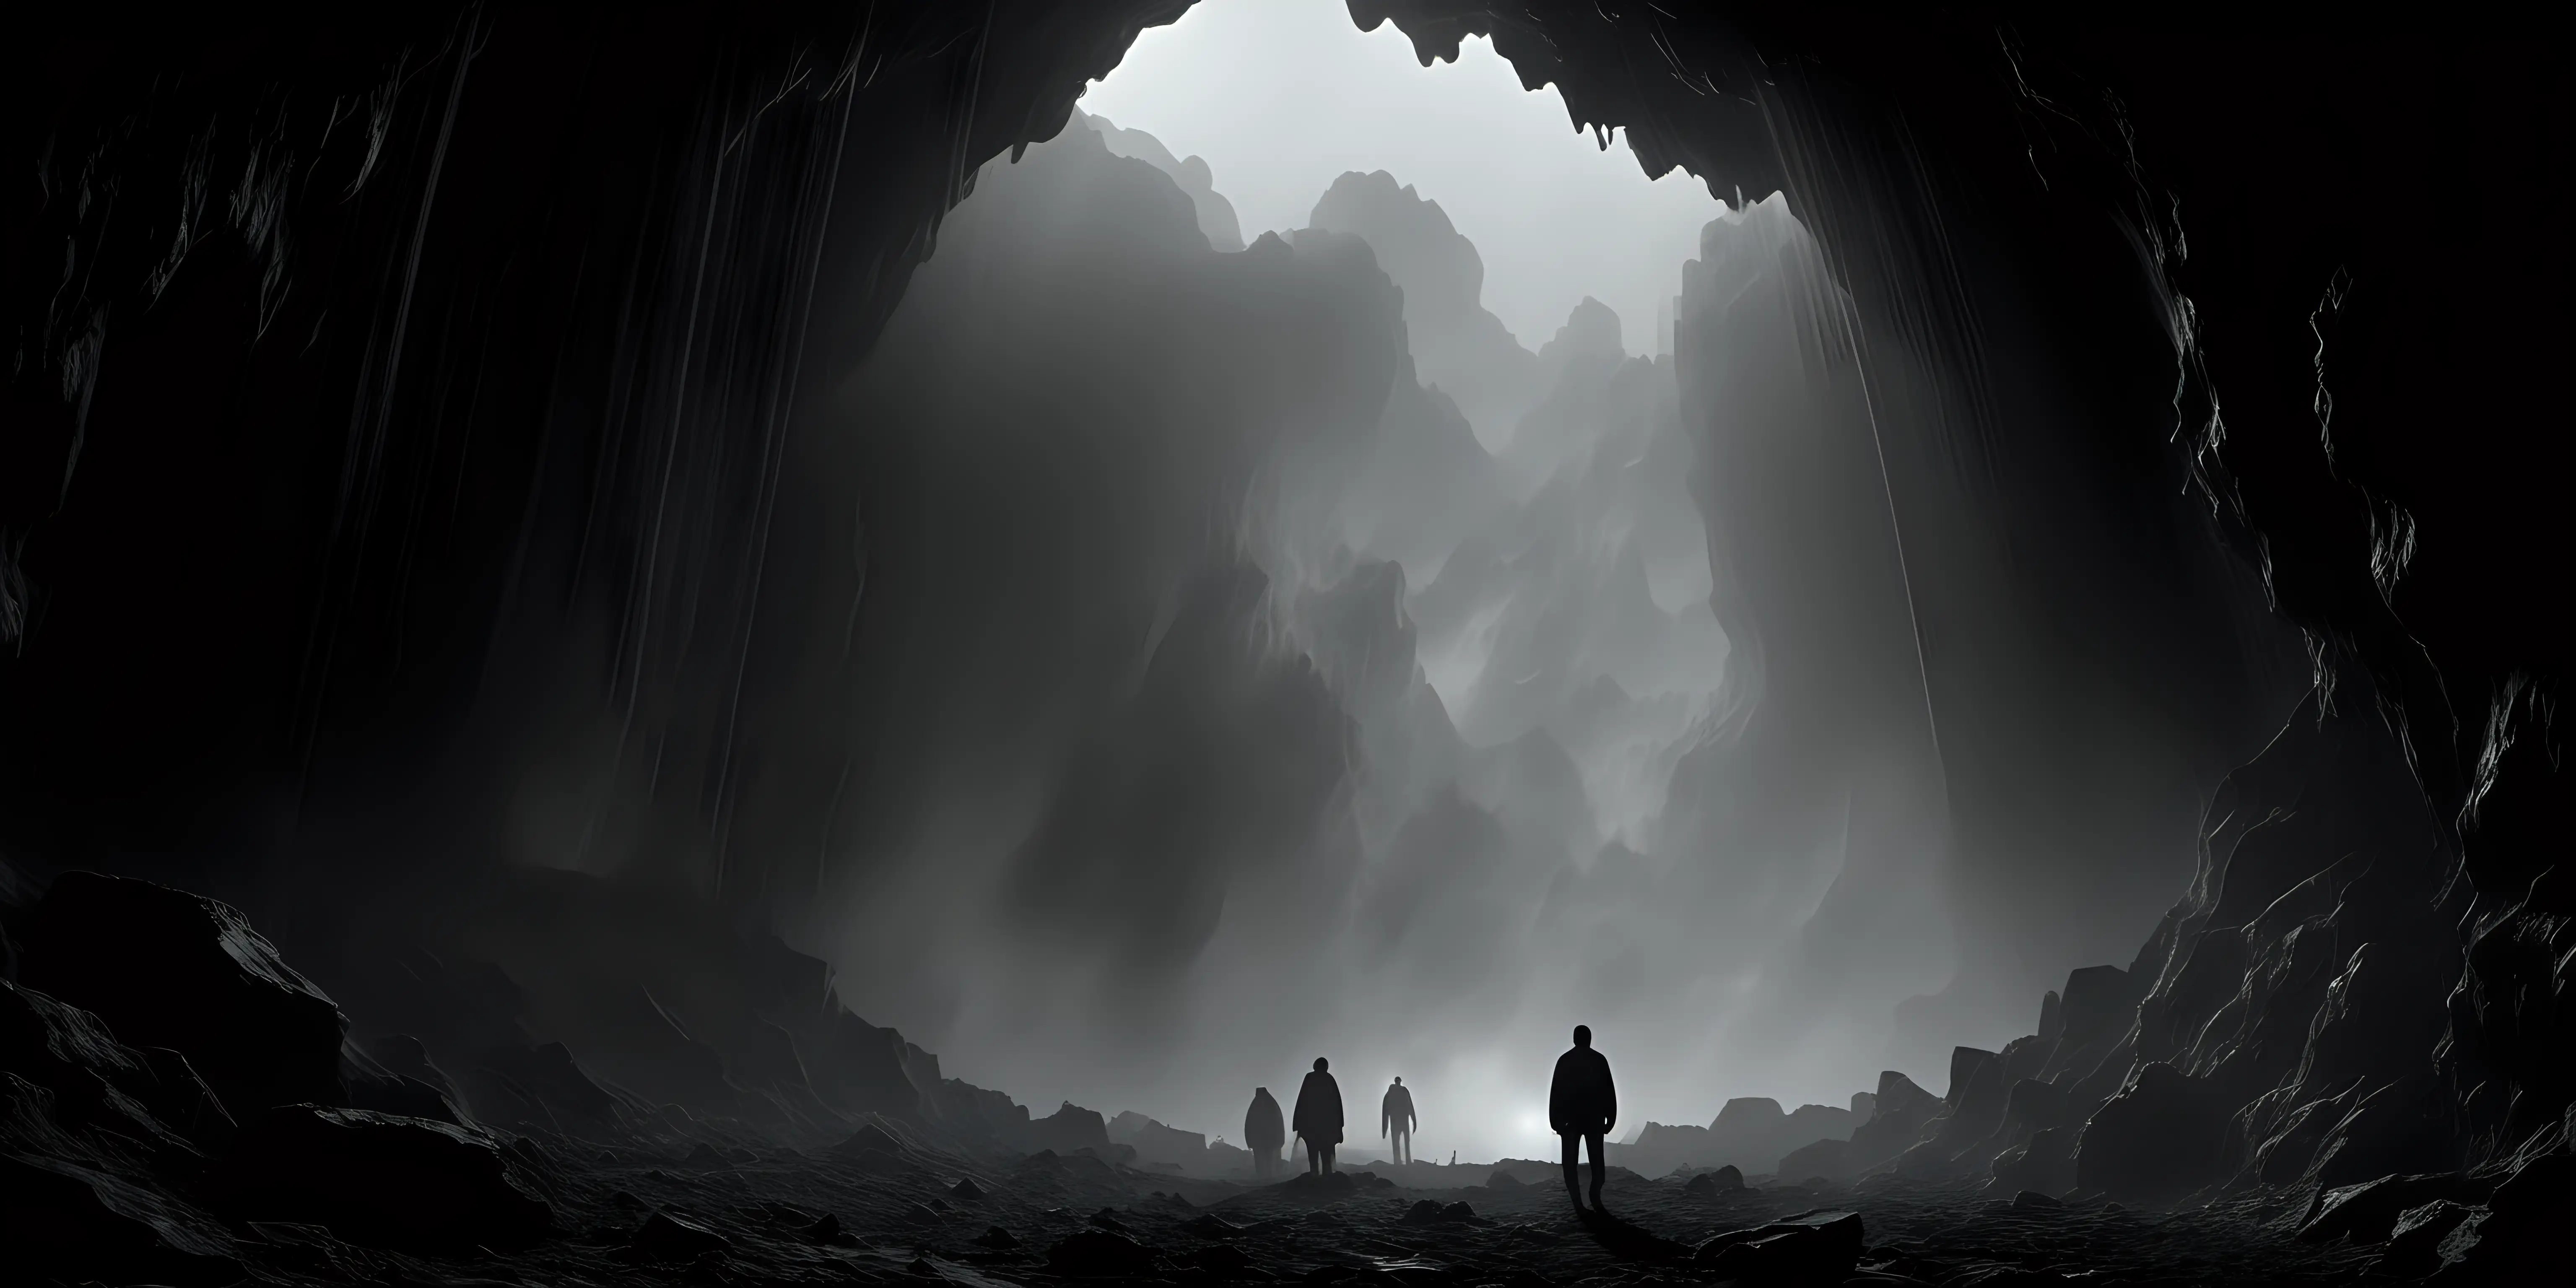 Dystopian Realism Cinematic Mist Cave Scene with Expansive Skies